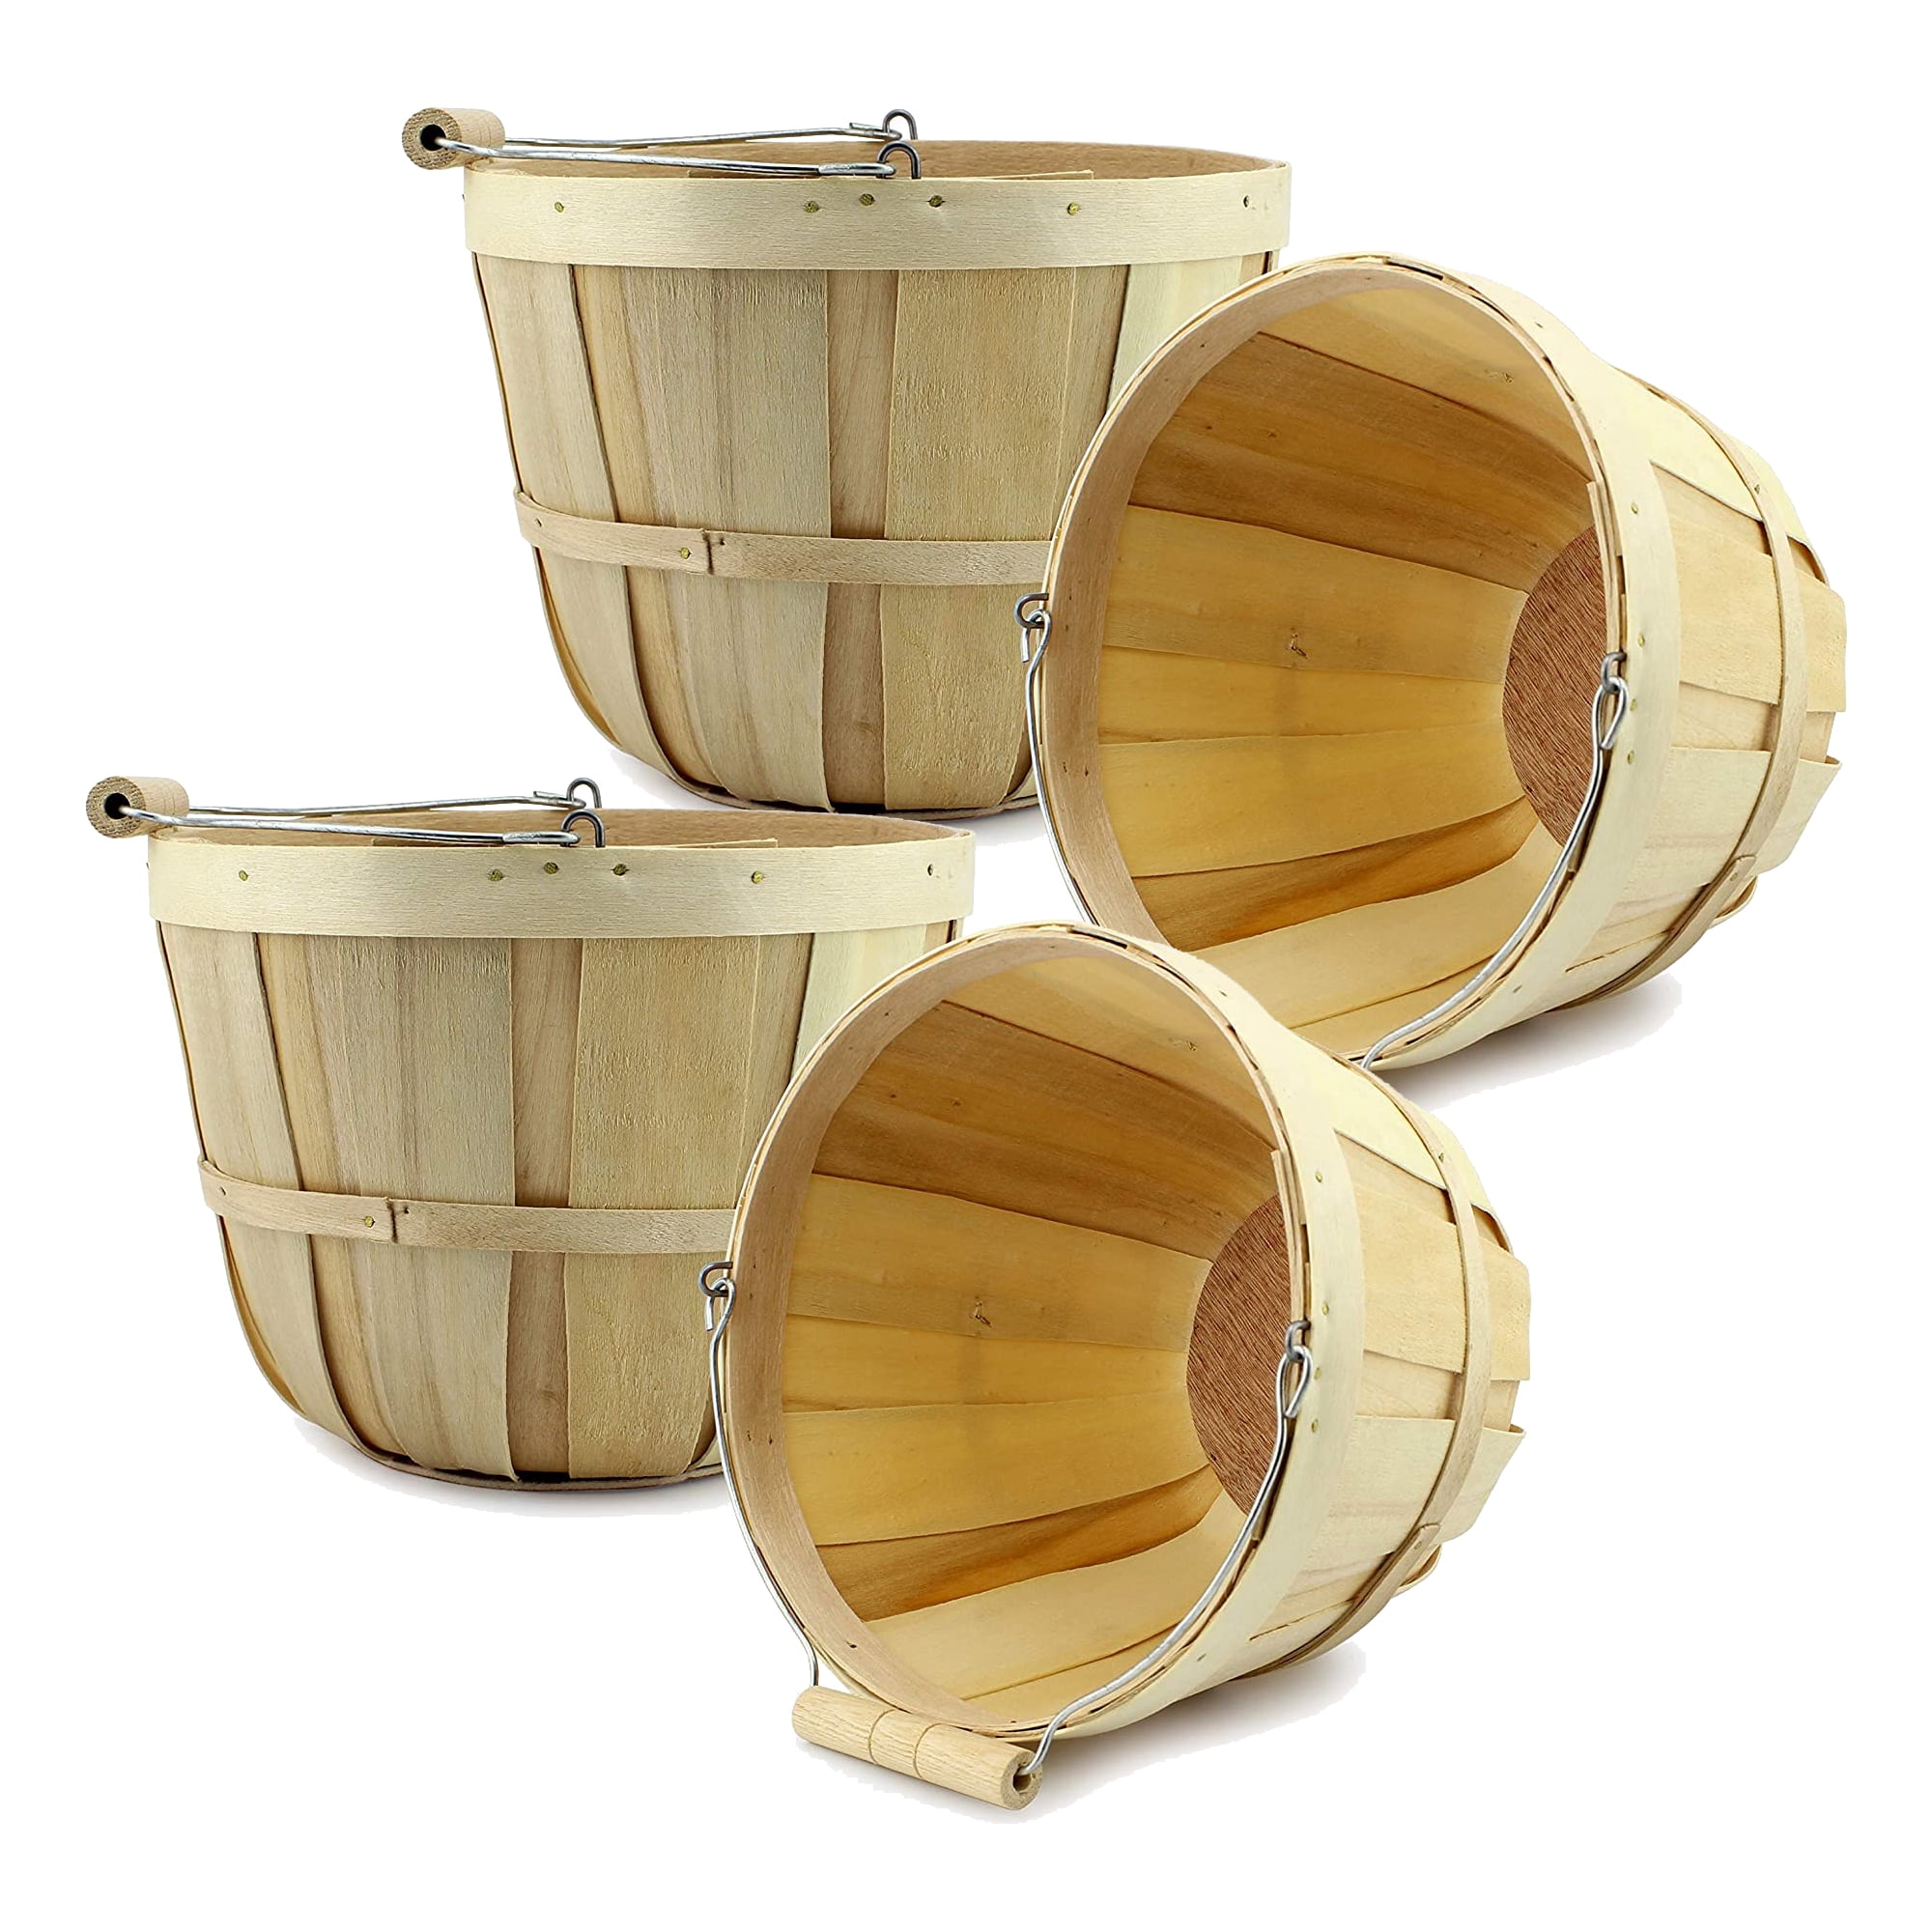 Cornucopia Round Wooden Baskets (4-Pack, Natural); Wood Fruit Buckets with  Handle, 4-Quart Capacity; 6.1 Inch Tall by 8 Inch Diameter